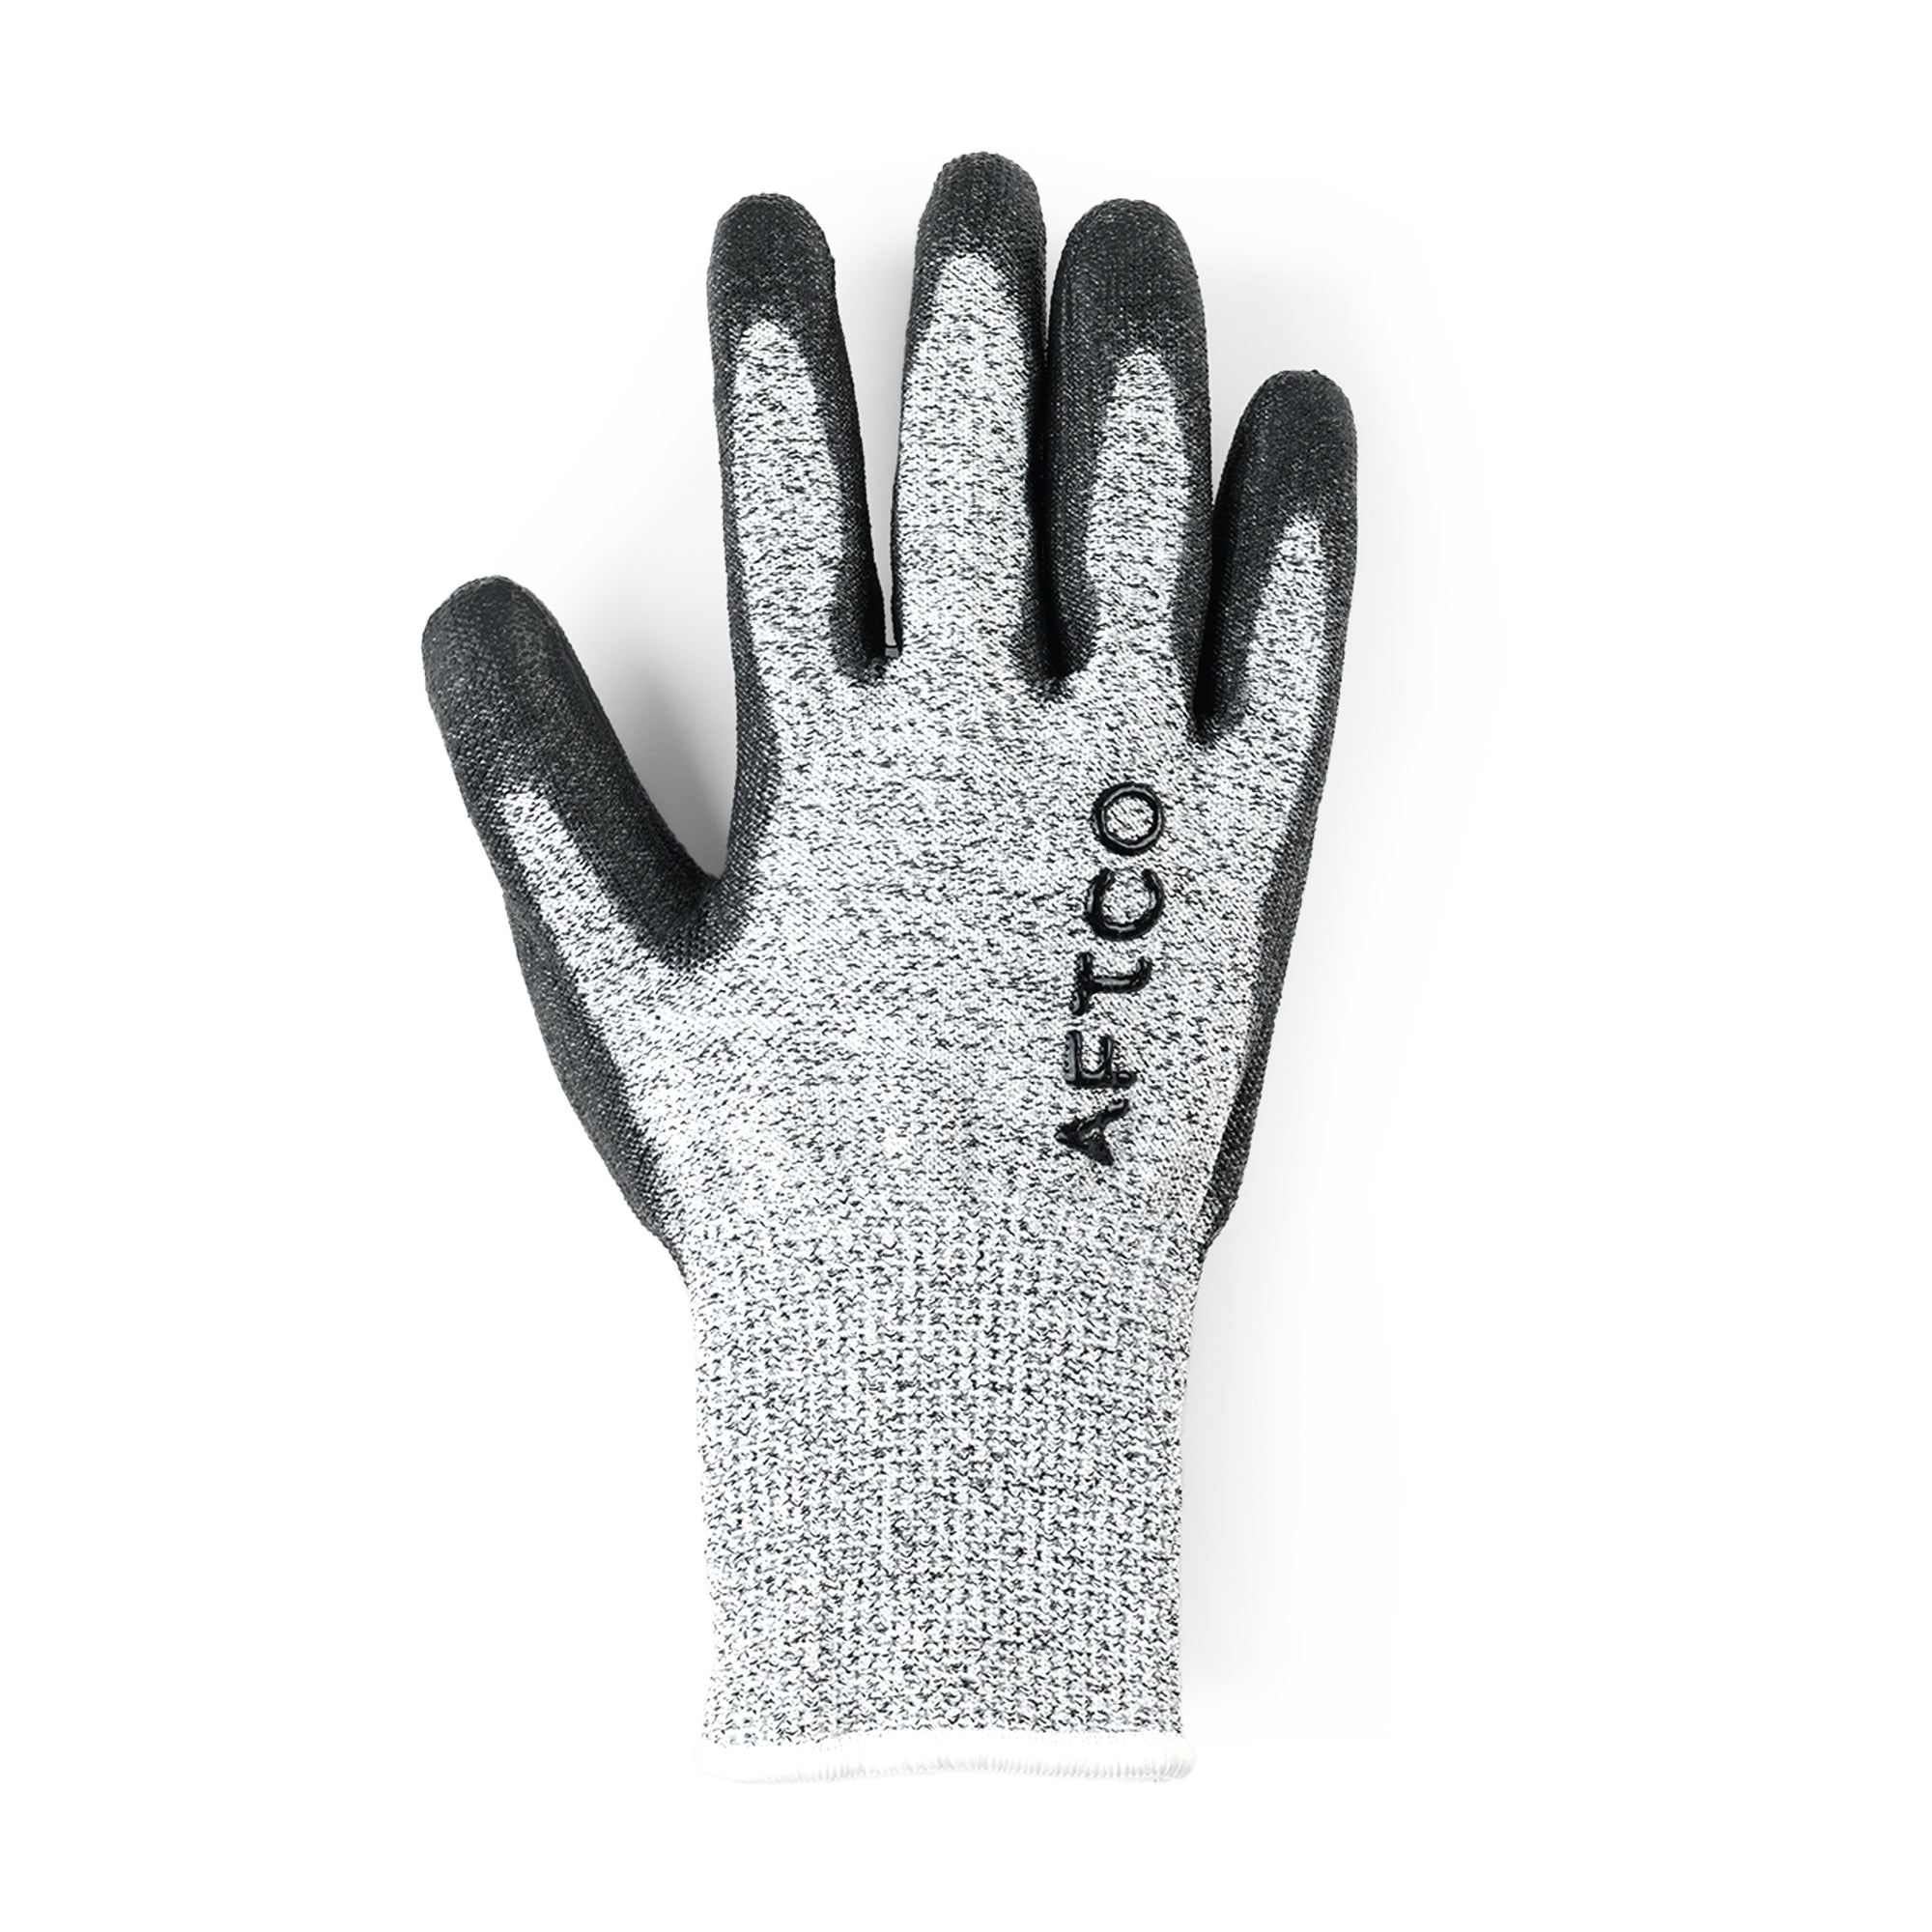 AFTCO Helm Insulated Fishing Gloves